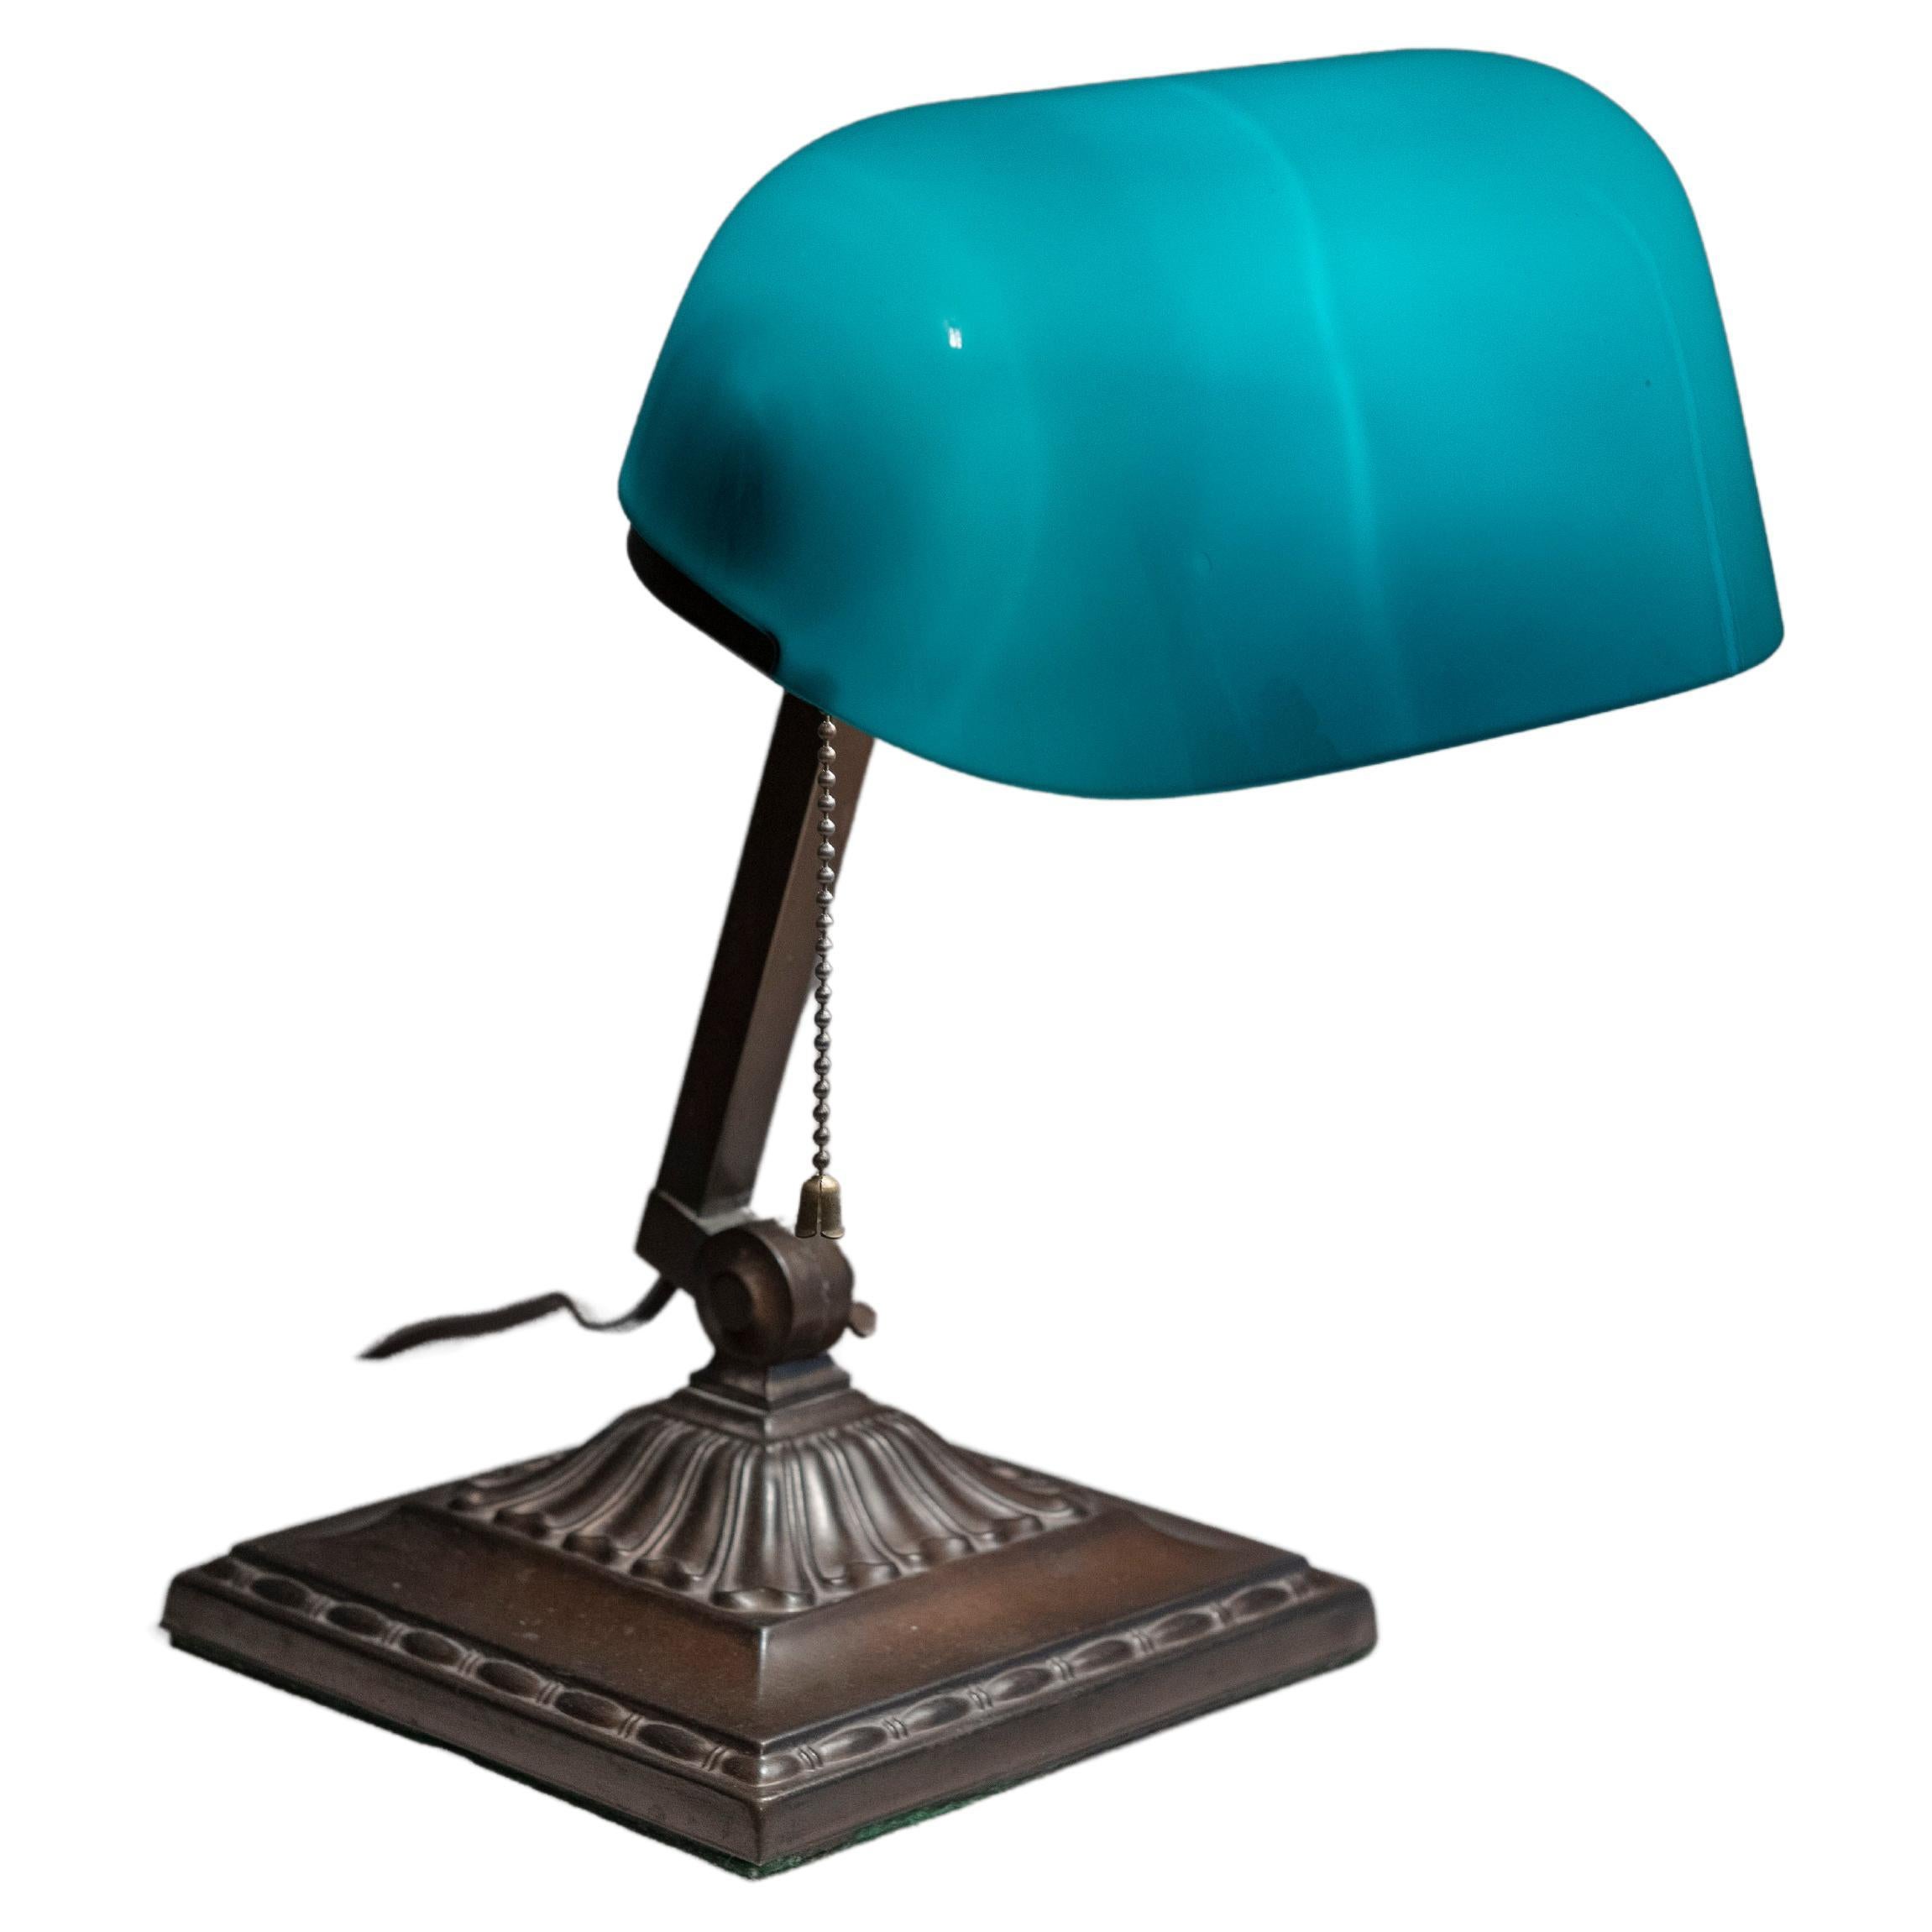 Antique Banker's Desk Lamp by Emeralite, Original Green Shade, ca. 1917 For Sale